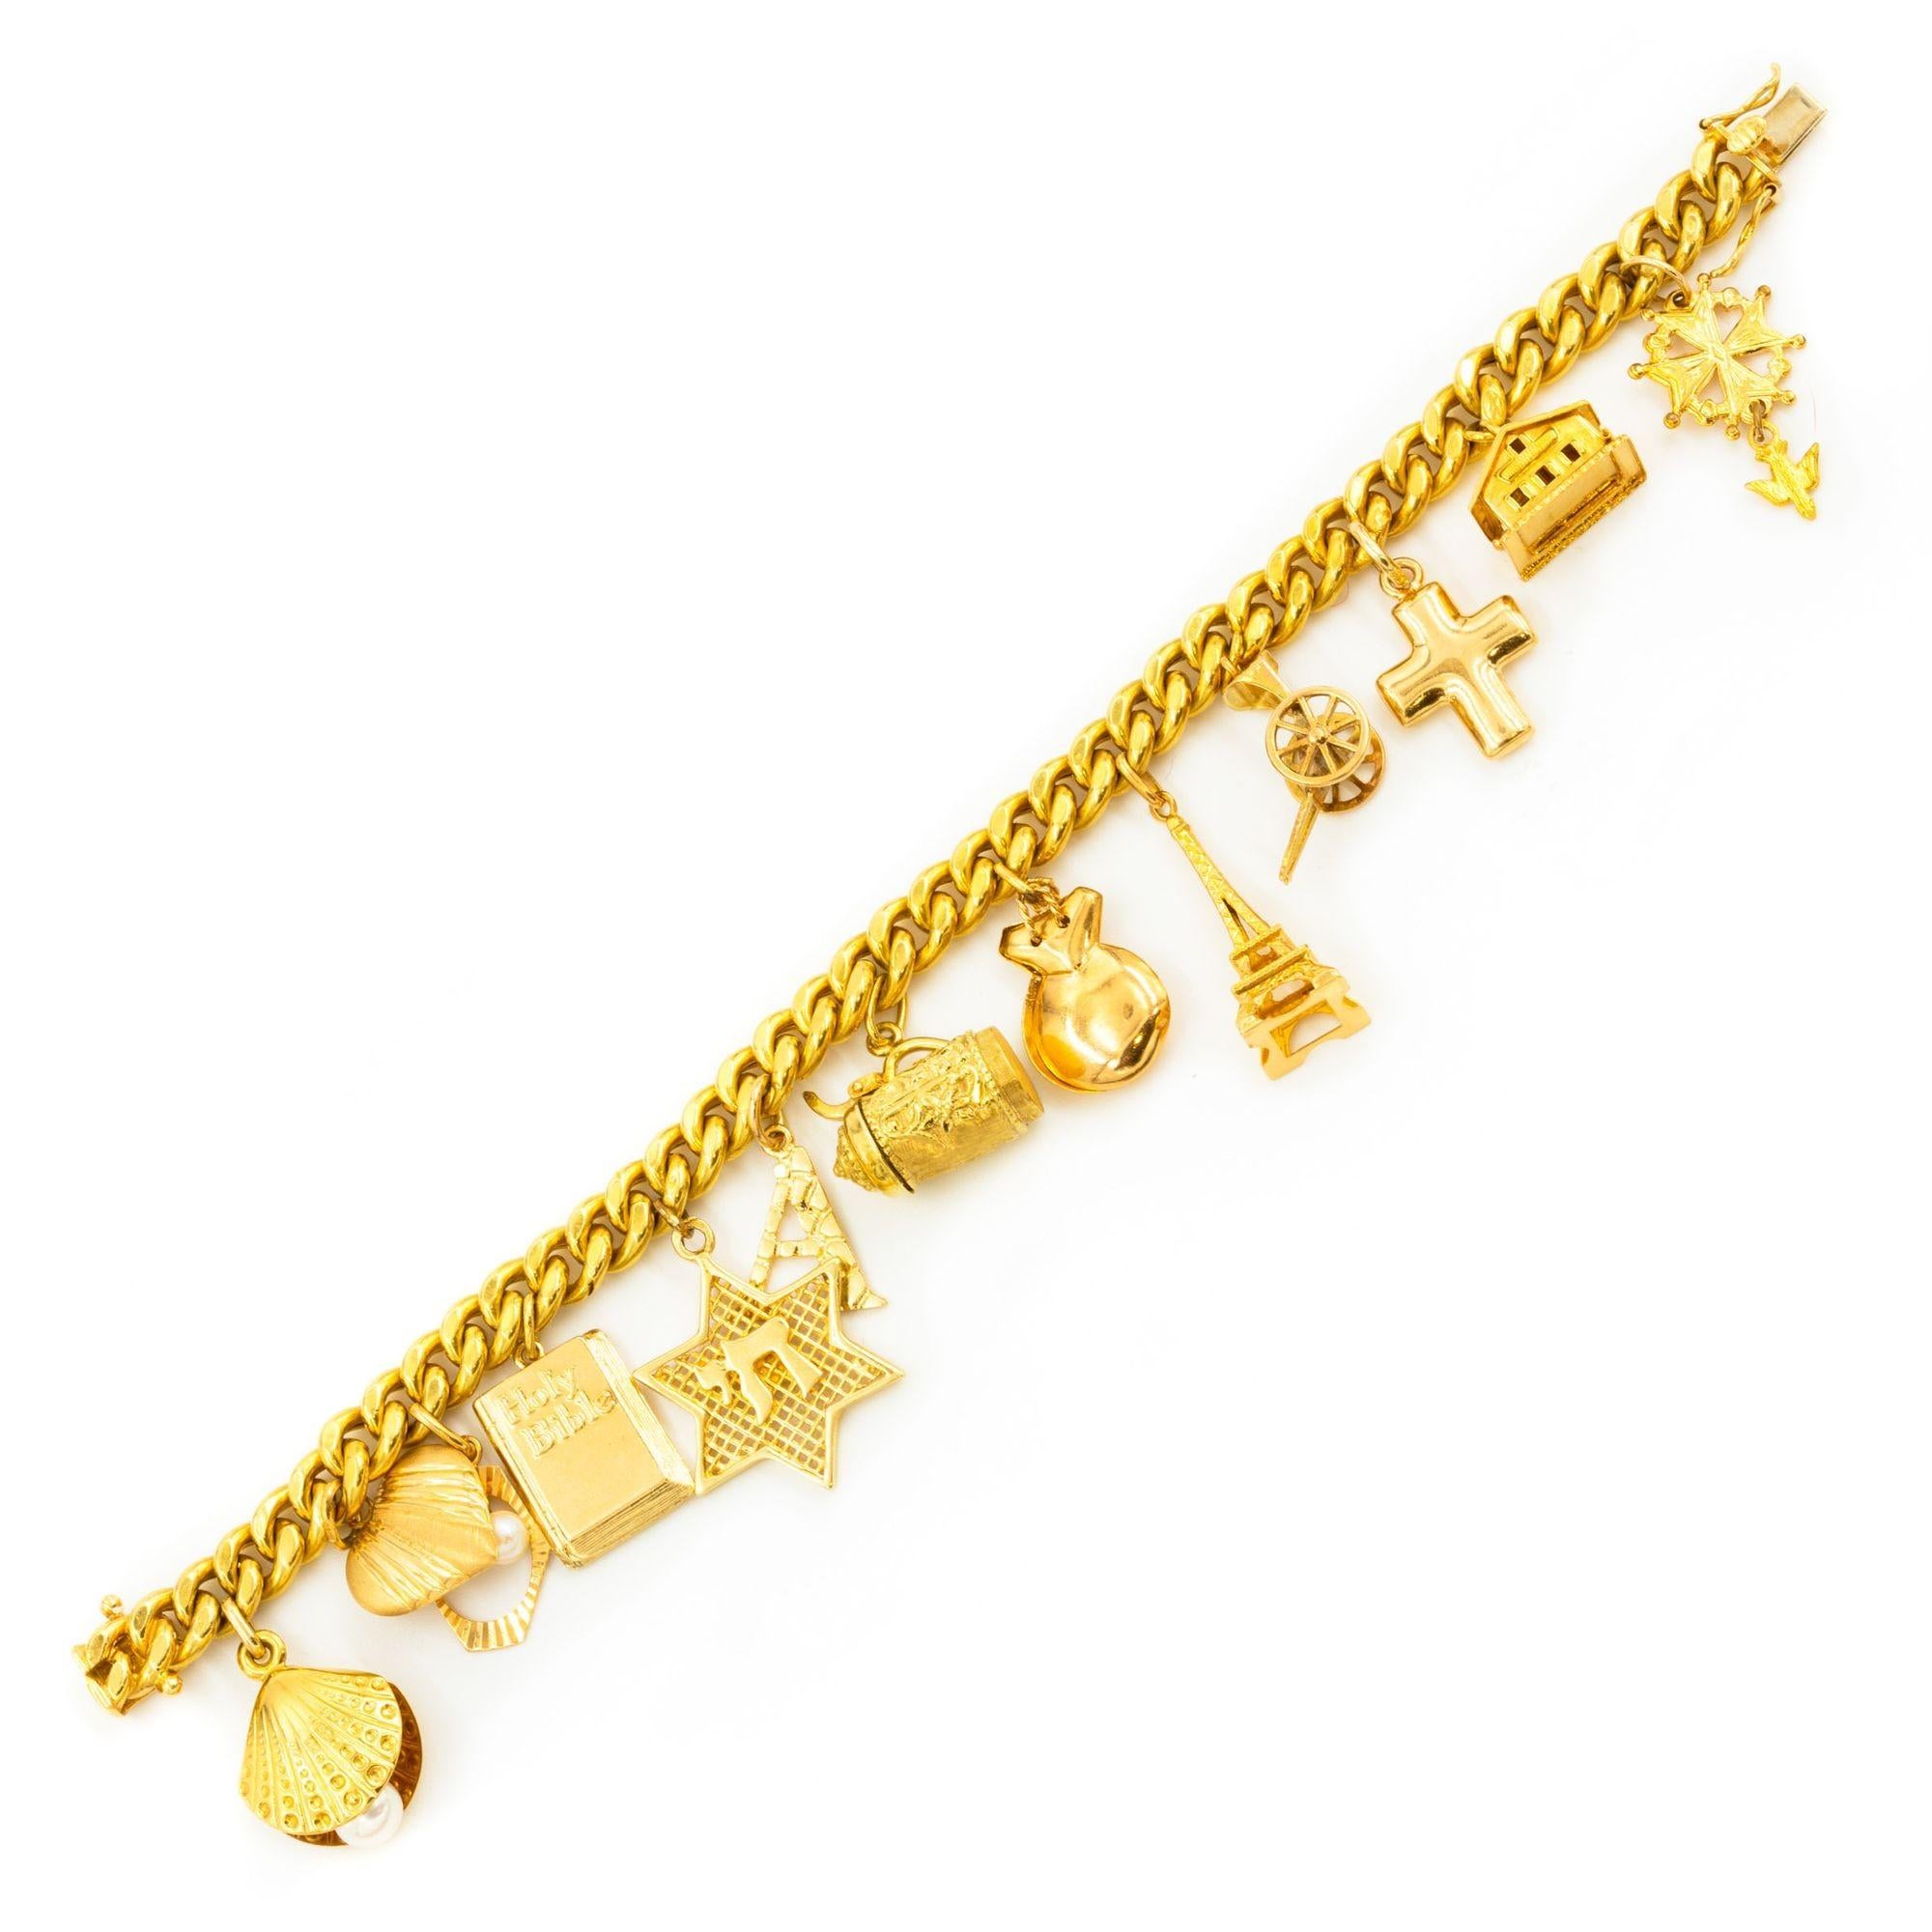 Vintage Italian 18k Gold Bracelet with 14k Gold Charms by Uno-a-Erre 9